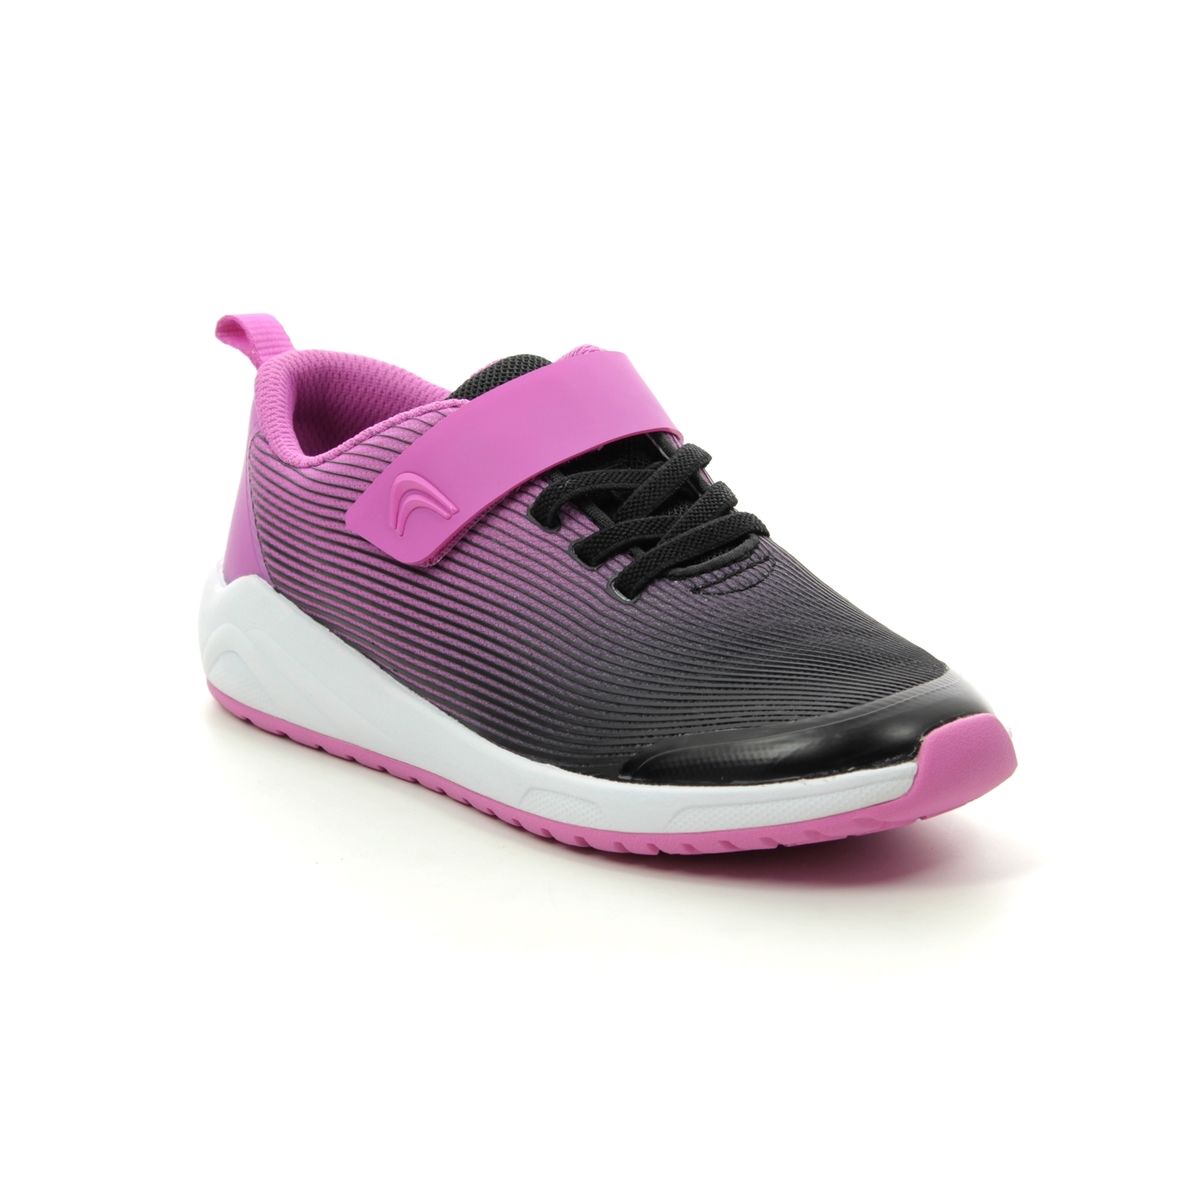 clarks pink trainers